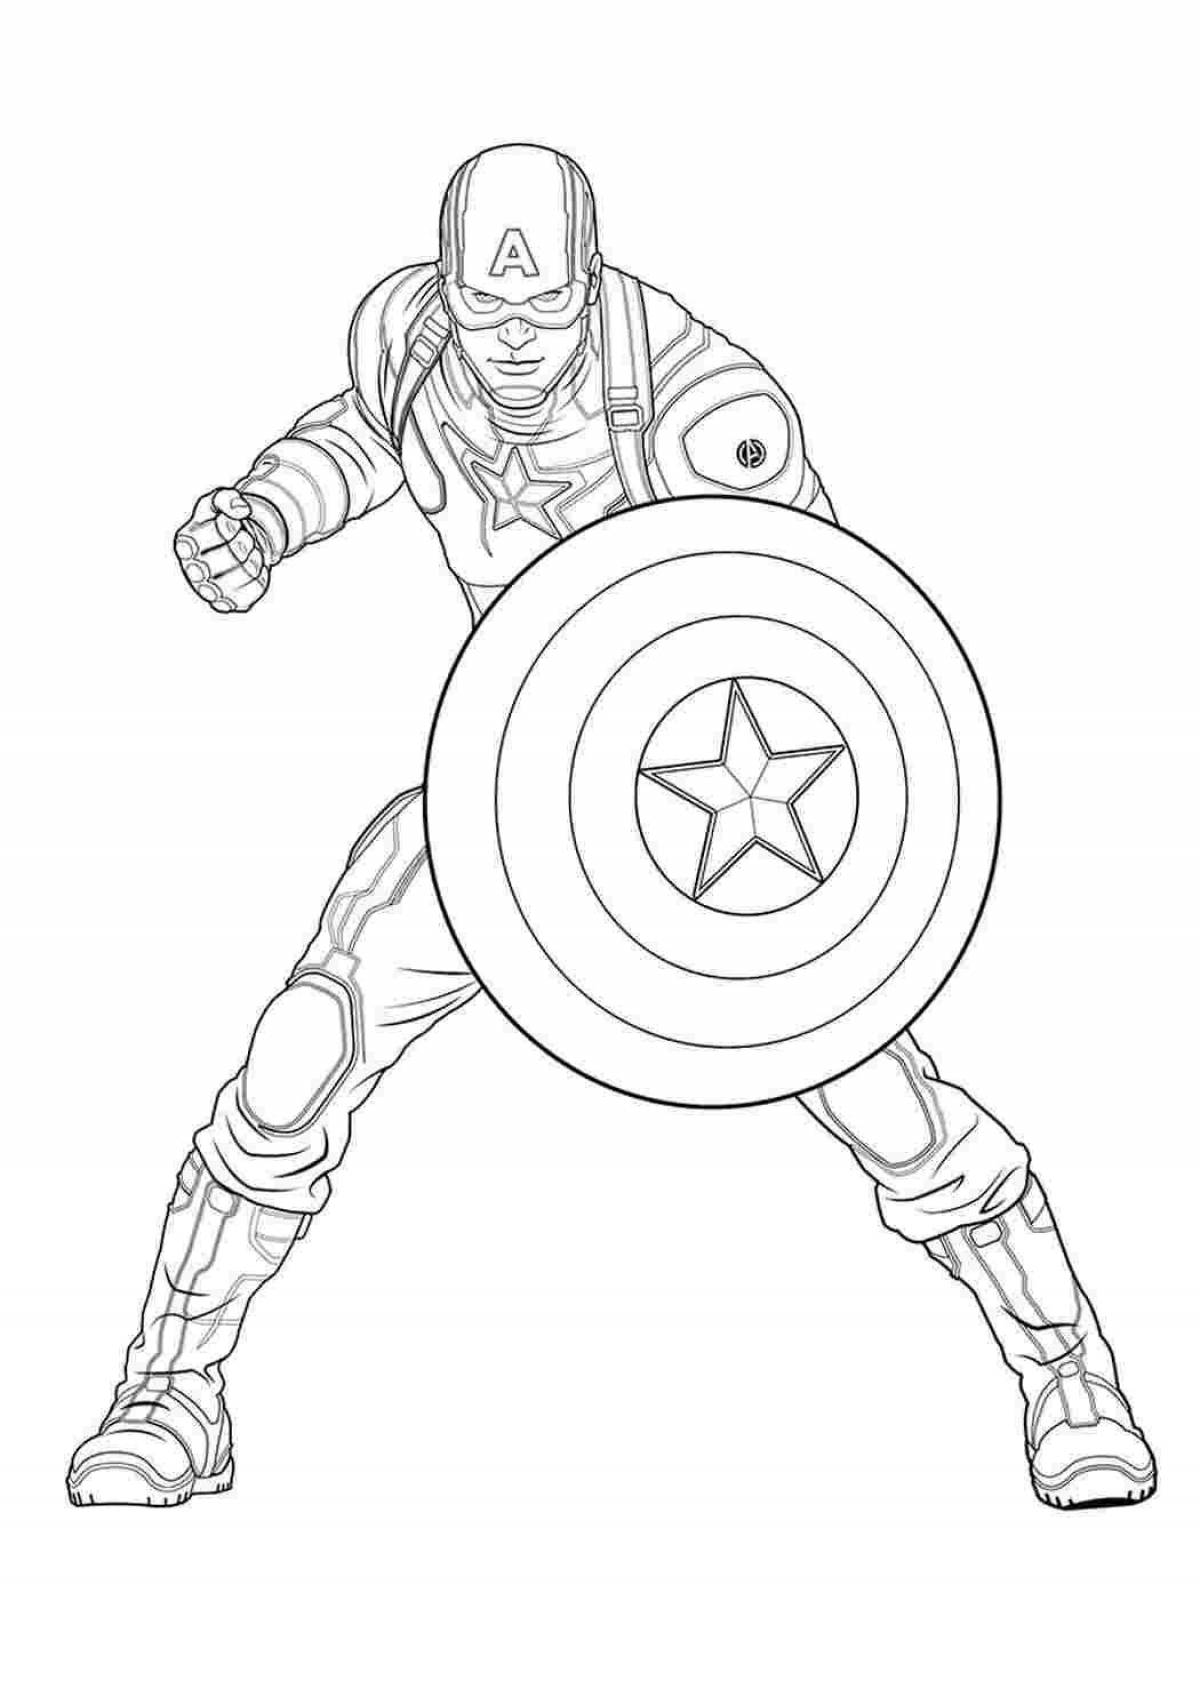 Captain America coloring book for kids